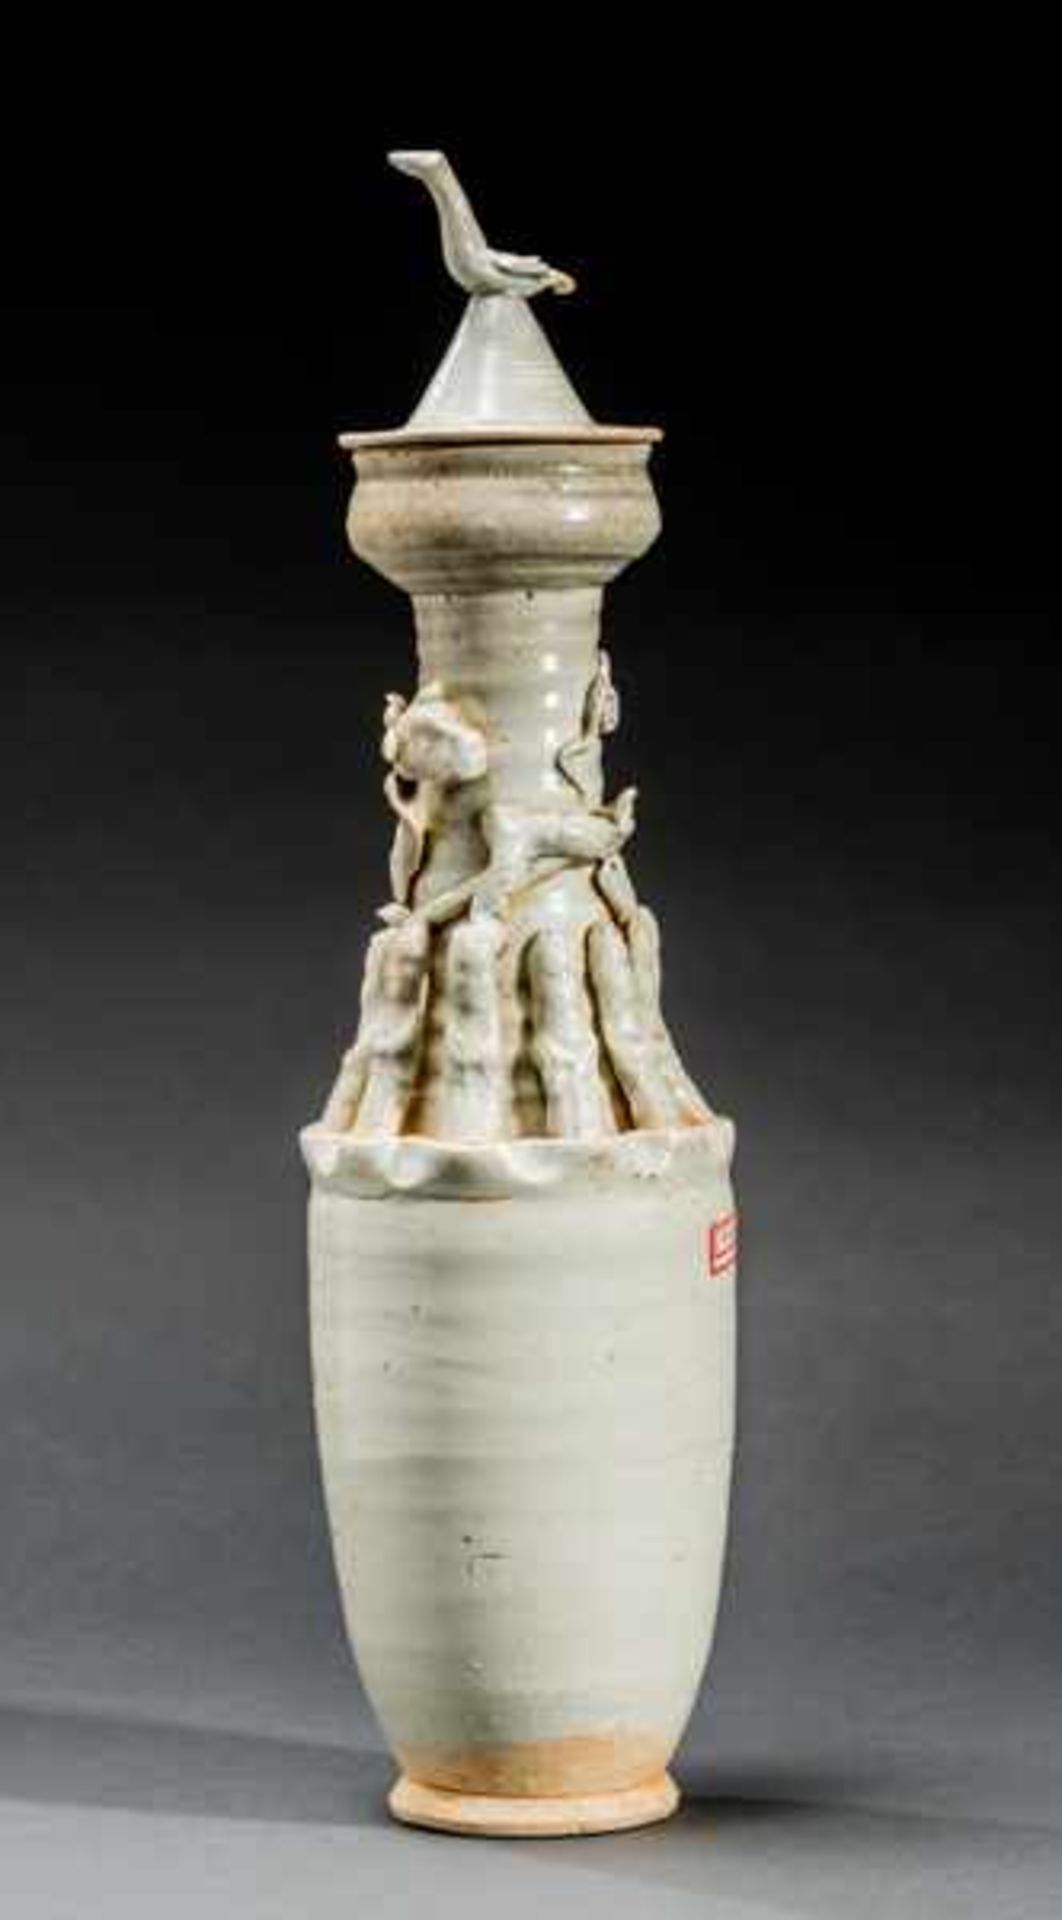 TALL BURIAL VASE Glazed ceramic. China, Song dynasty(12th/13th cent.)個墓葬瓶Burial vases of this kind